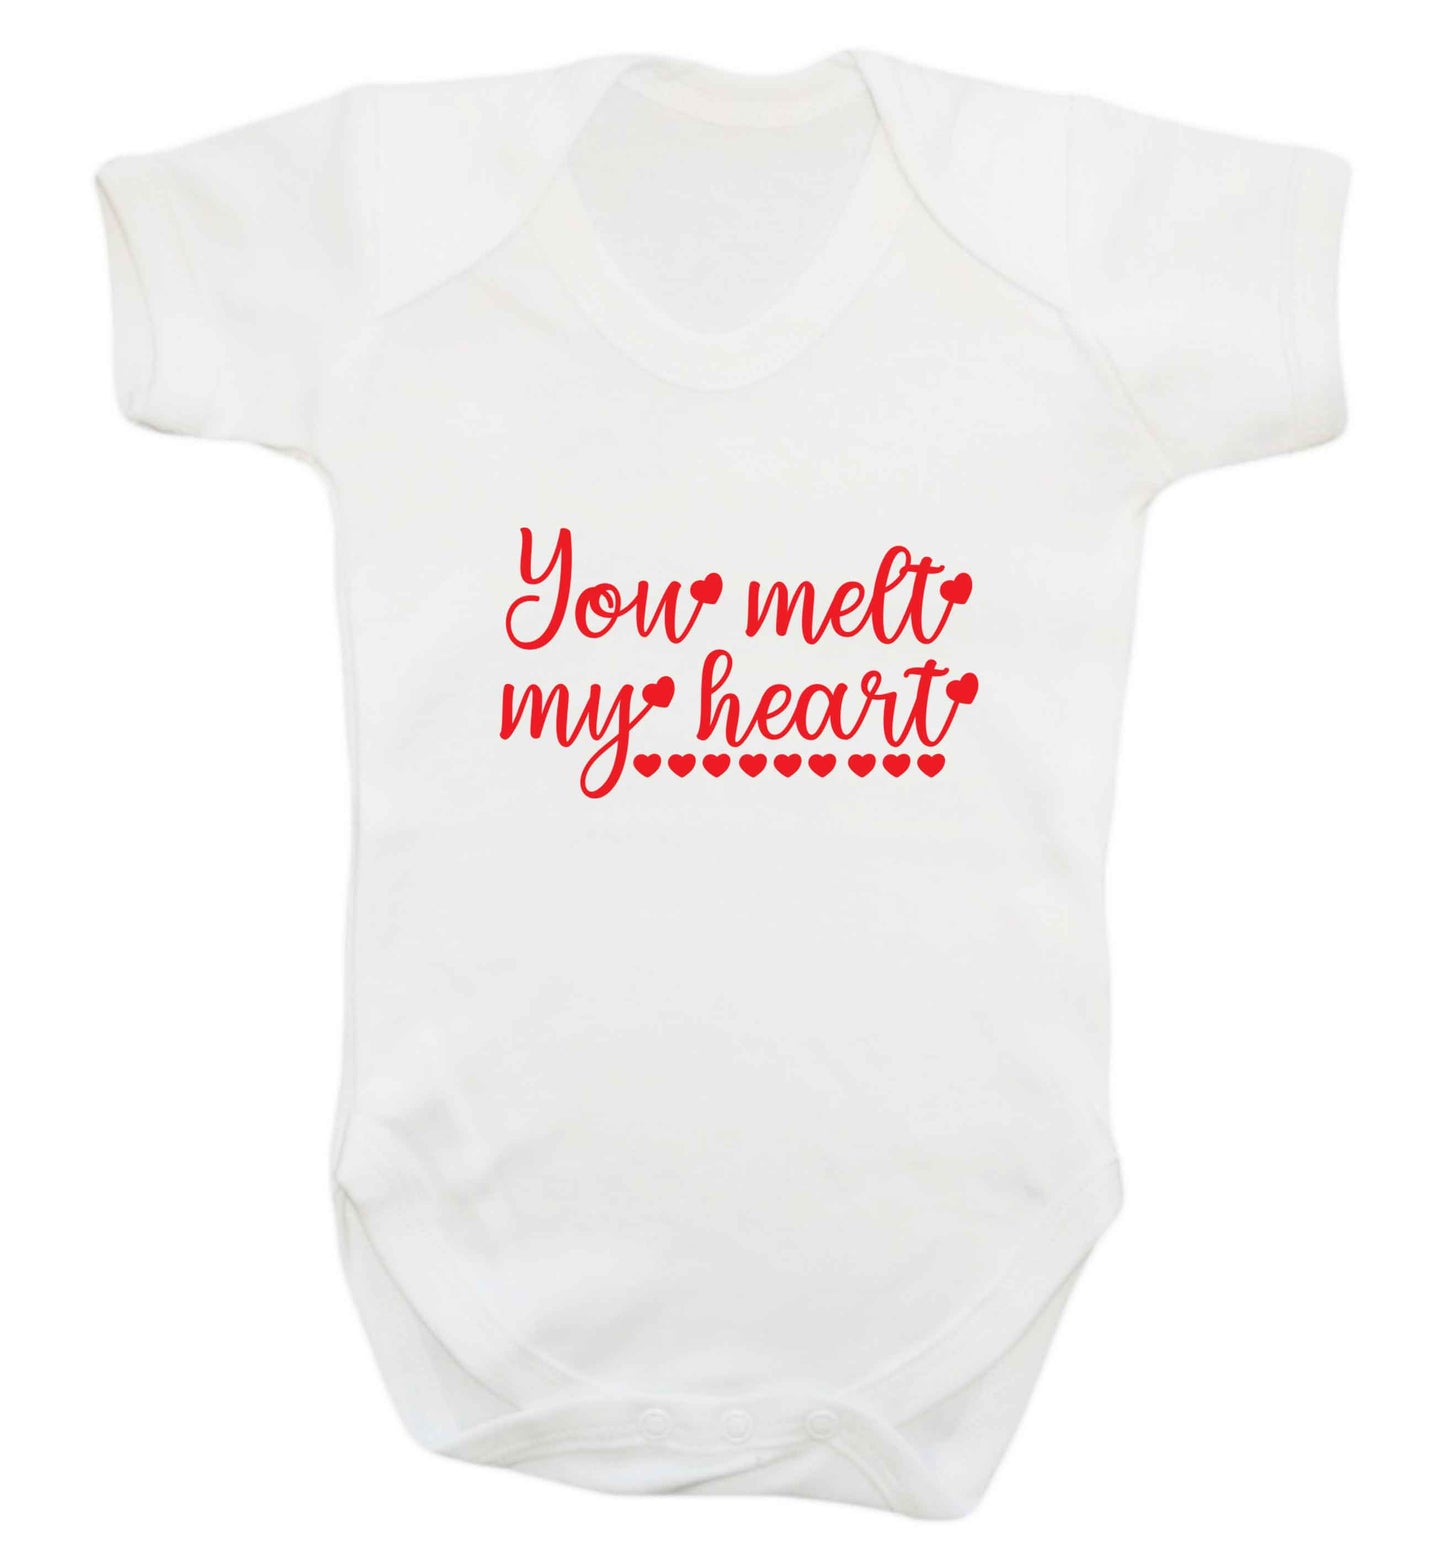 You melt my heart baby vest white 18-24 months